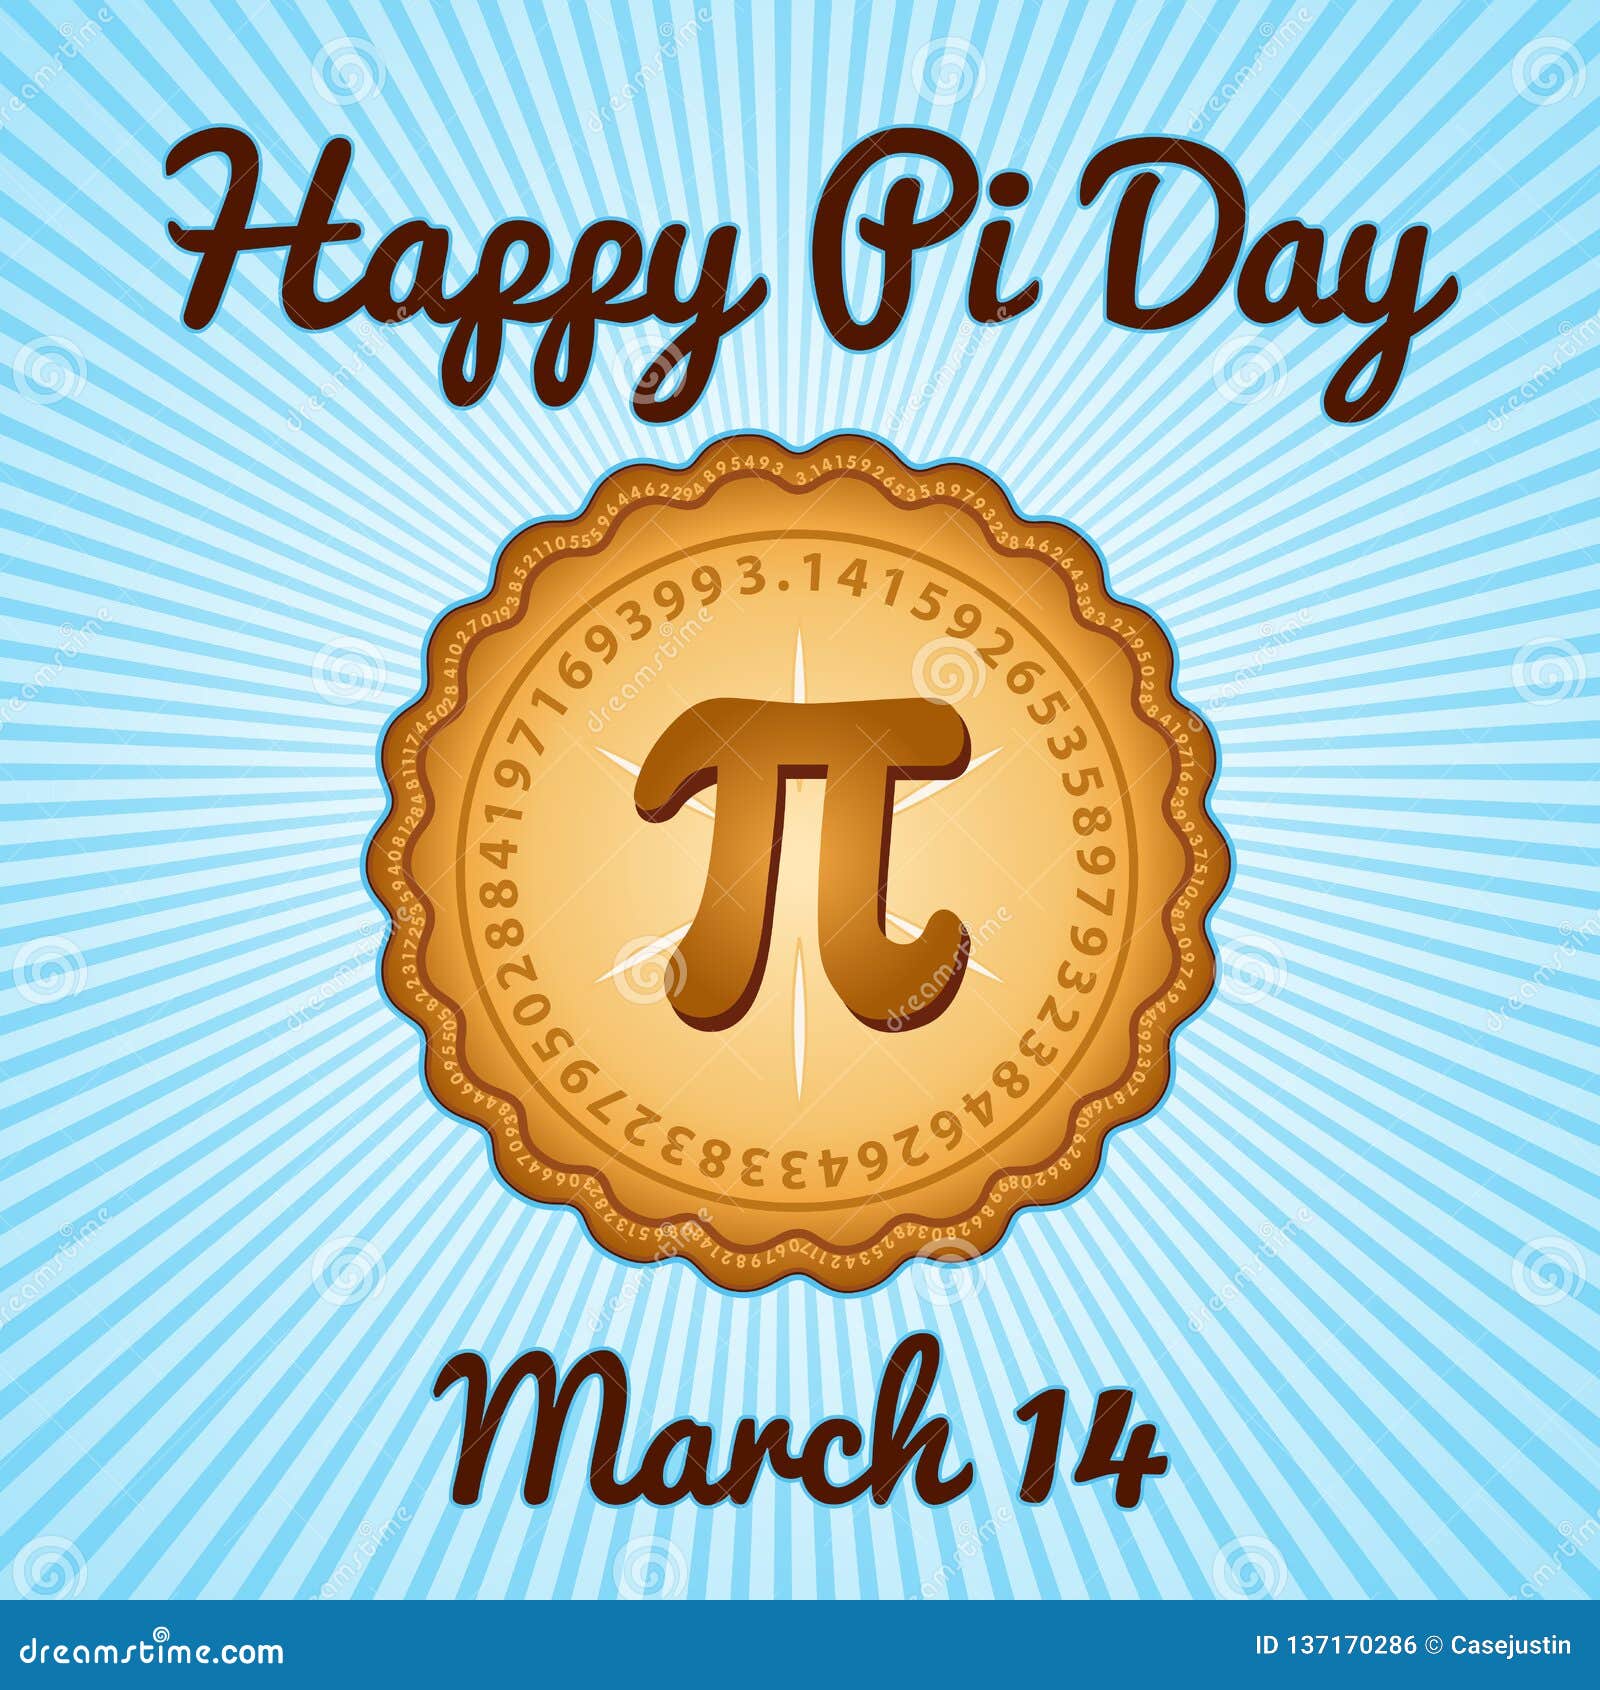 Happy Pi Day March To Celebrate Mathematical Constant Pi To Eat Lots Fresh Baked Sweet Pie International Holiday Blue 137170286 